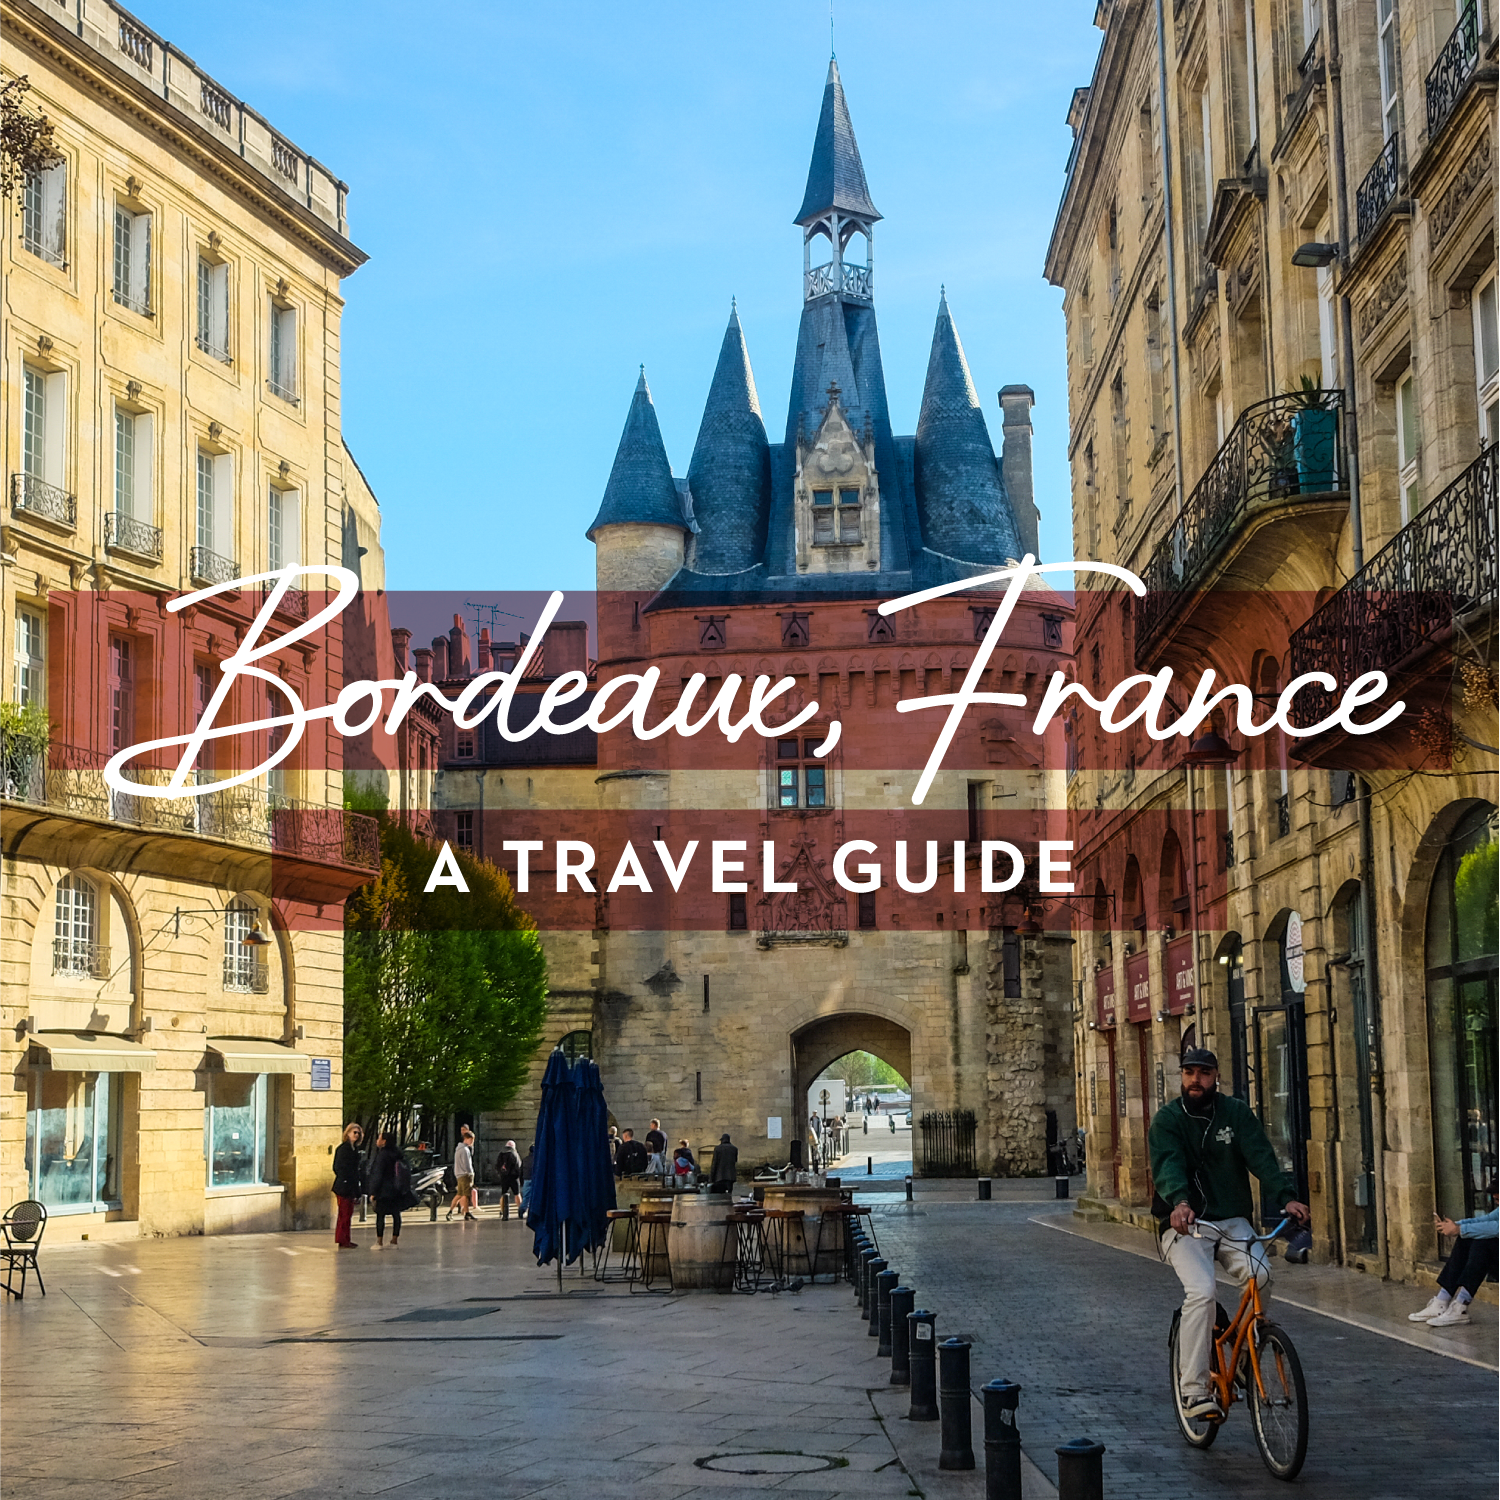 A travel and city guide for Bordeaux, France